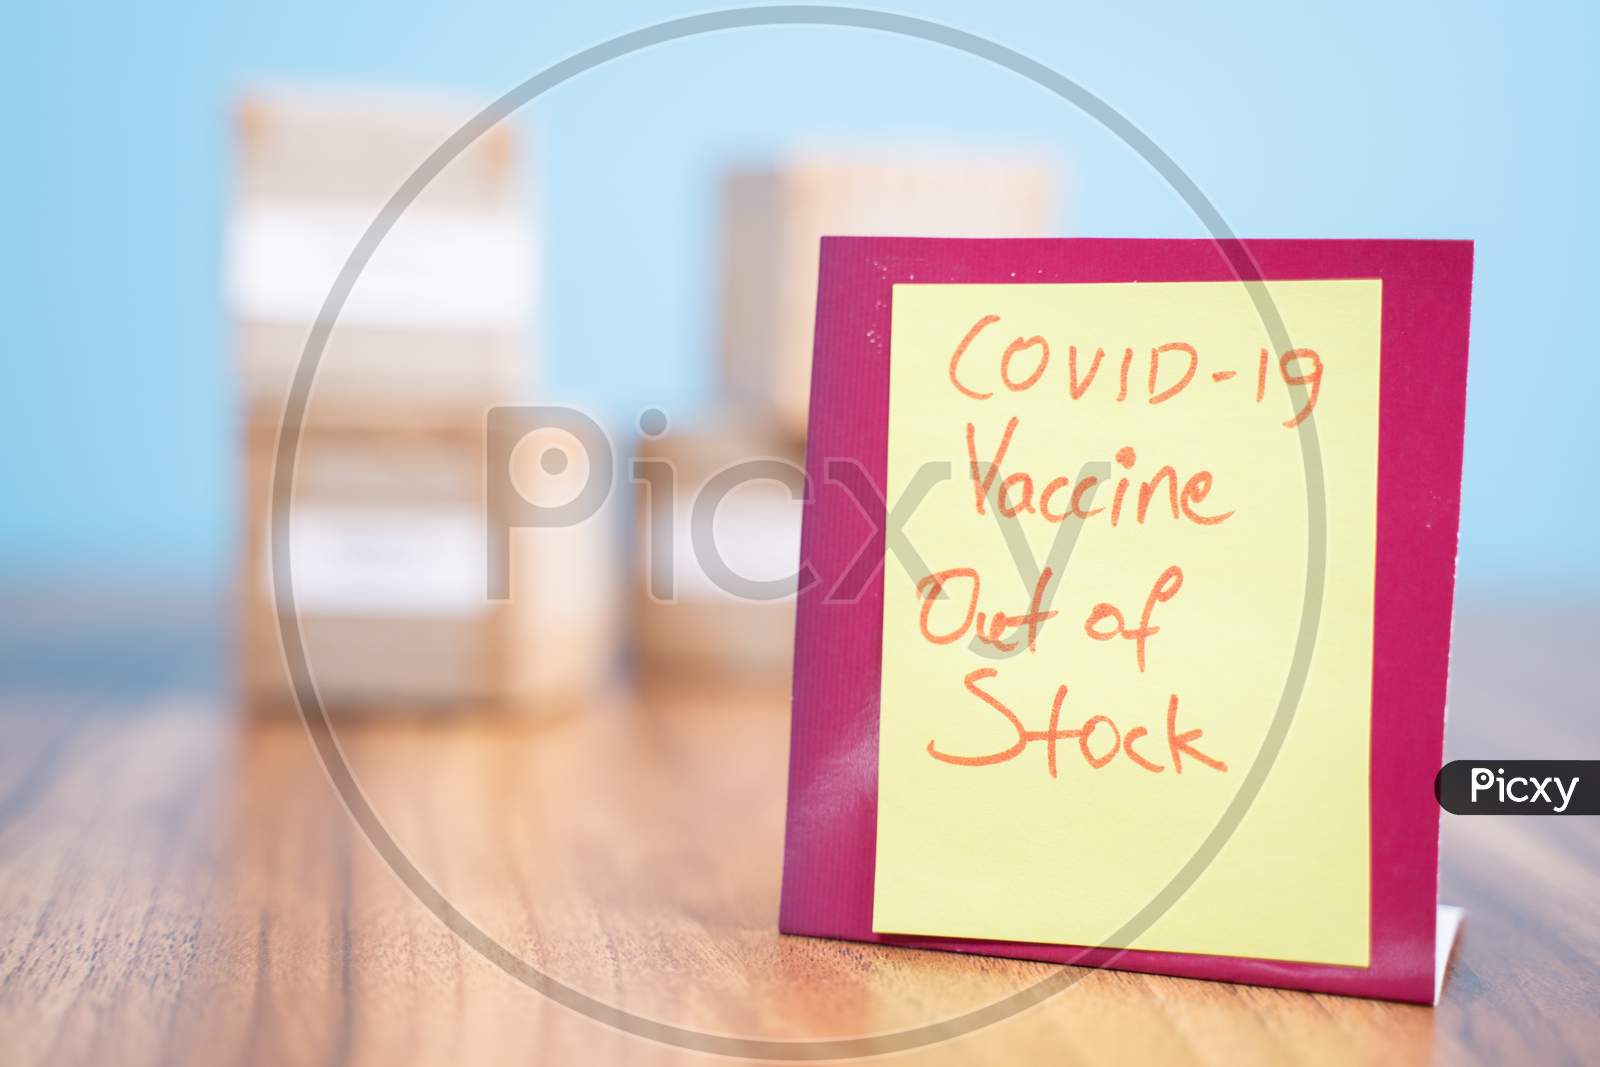 Concept Showing Of Coronavirus Covid-19 Vaccine Out Of Stock With Copy Space.